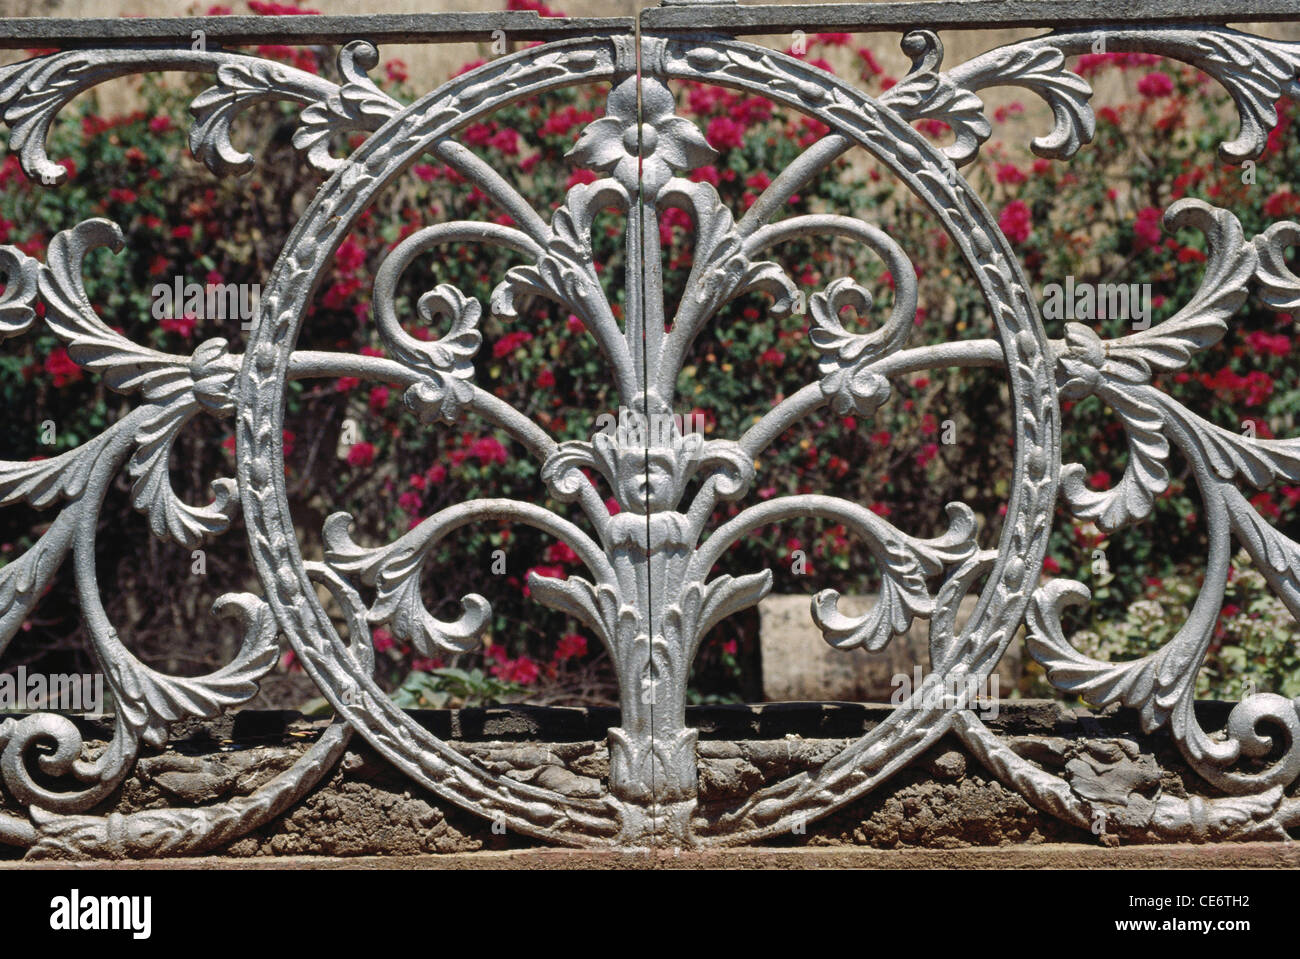 AAD 85162 : cast iron fence floral design in garden india Stock Photo